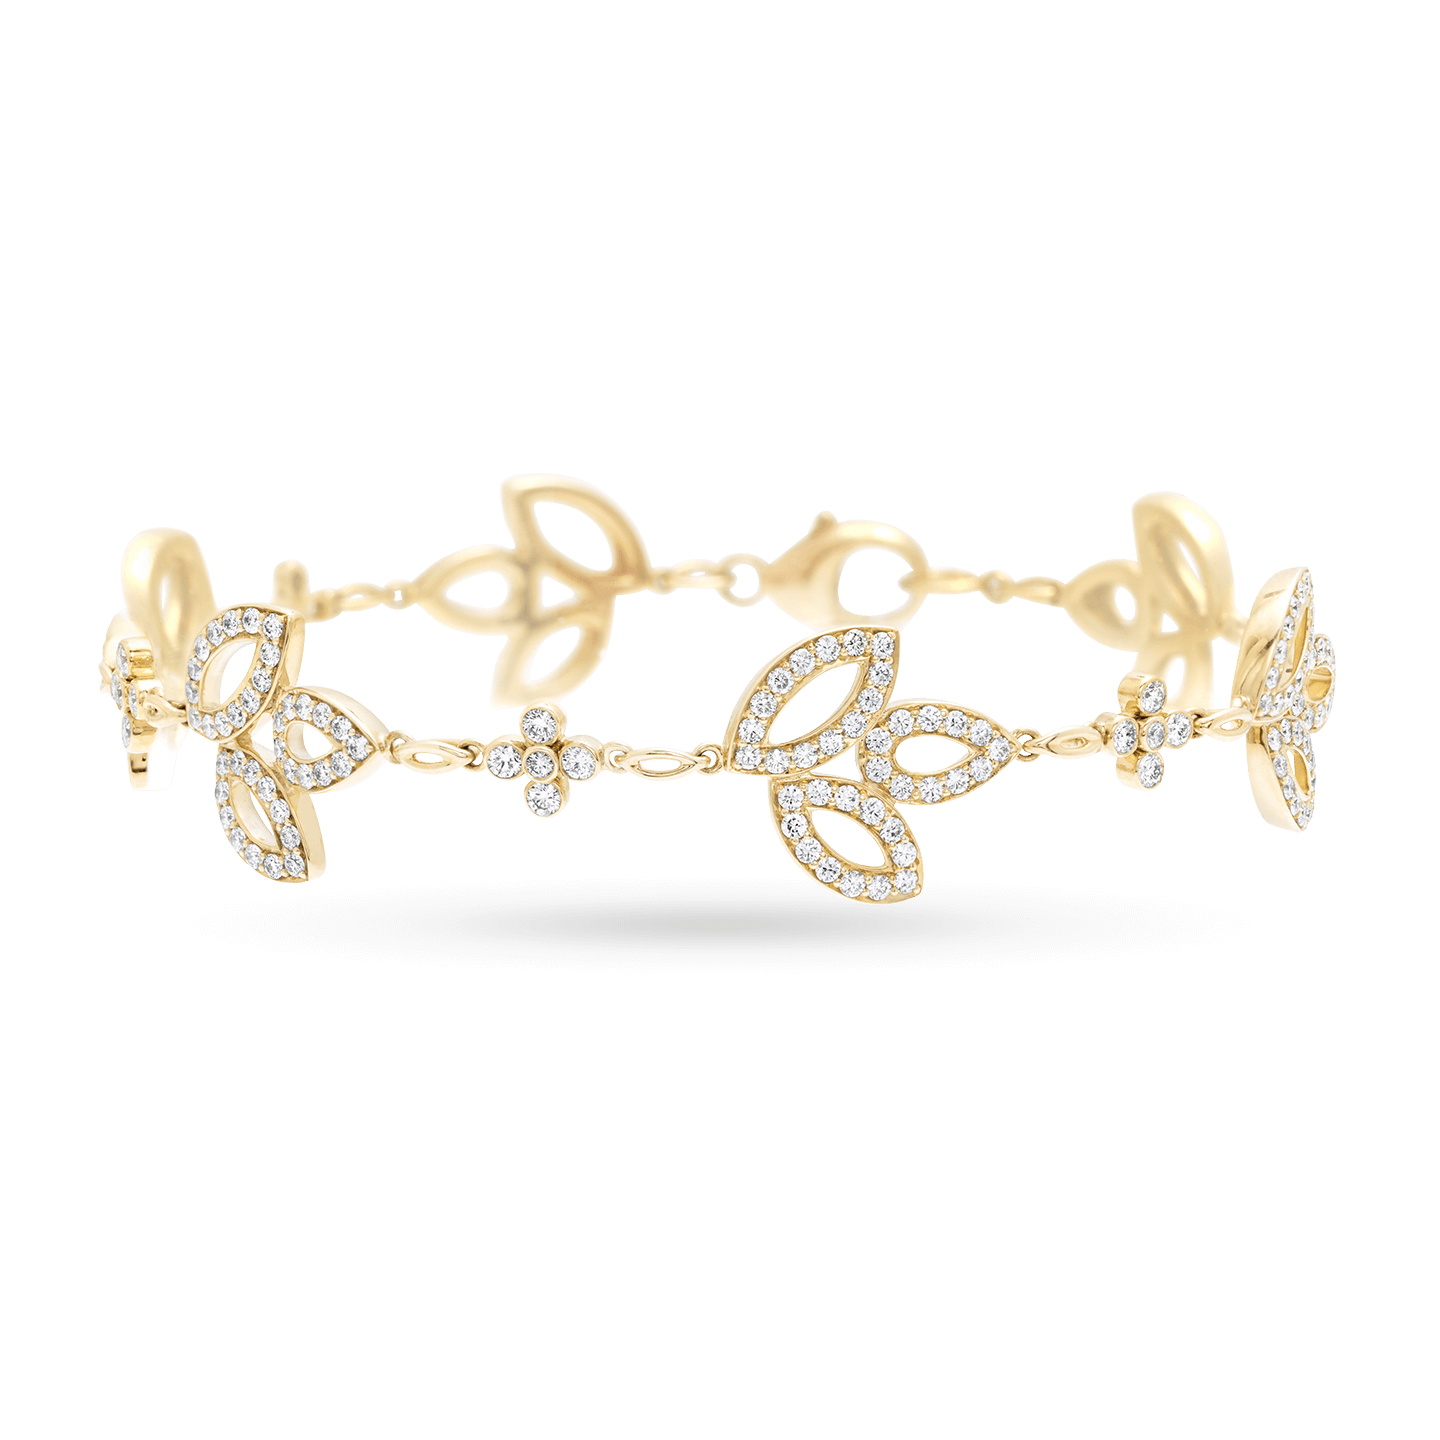 Lily Cluster Diamond Bracelet in Yellow Gold, Product Image 1